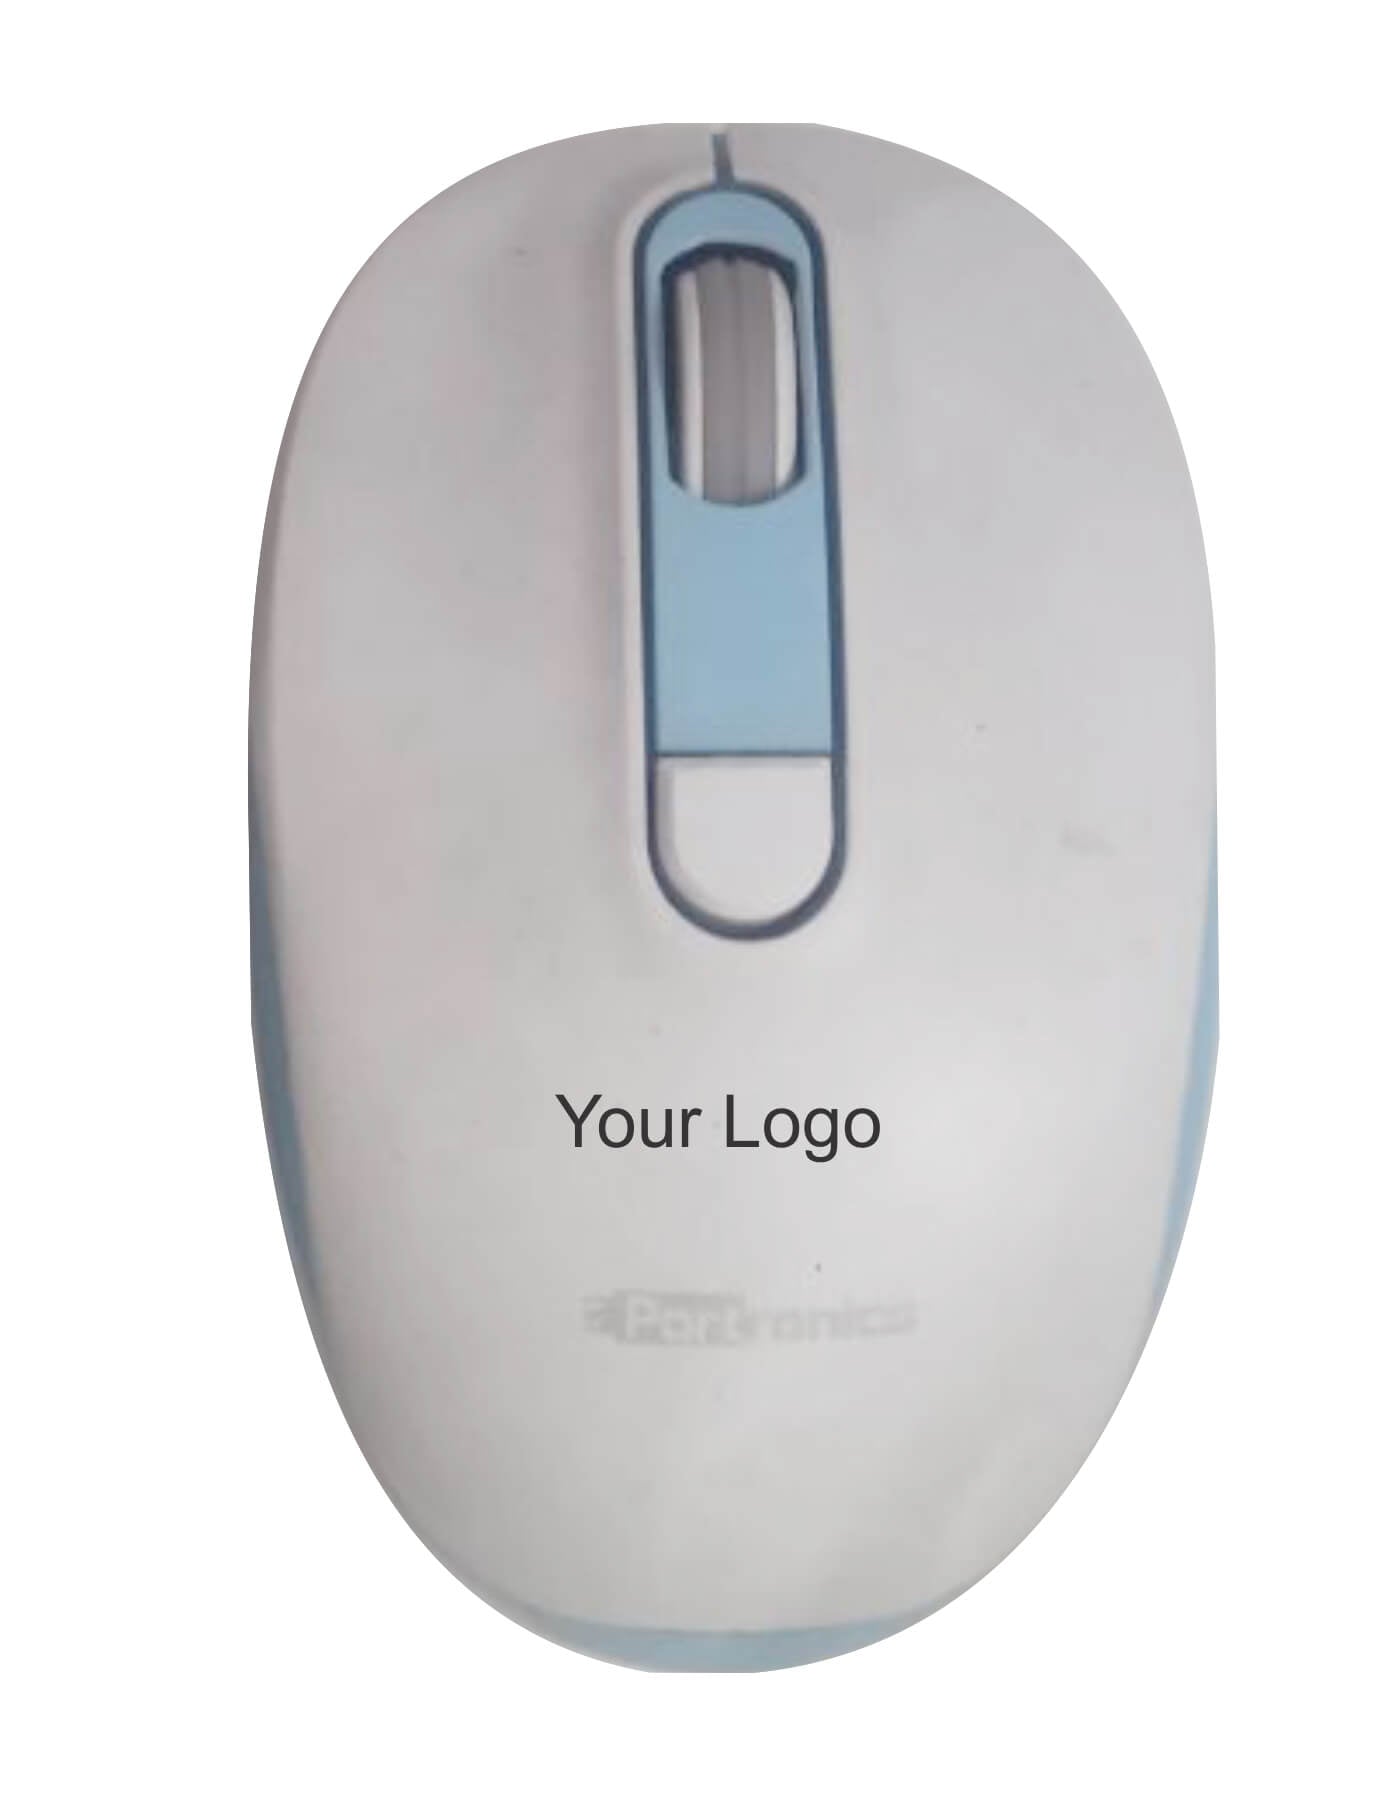 Portronics Toad 11 Slim Bluetooth Wireless Mouse